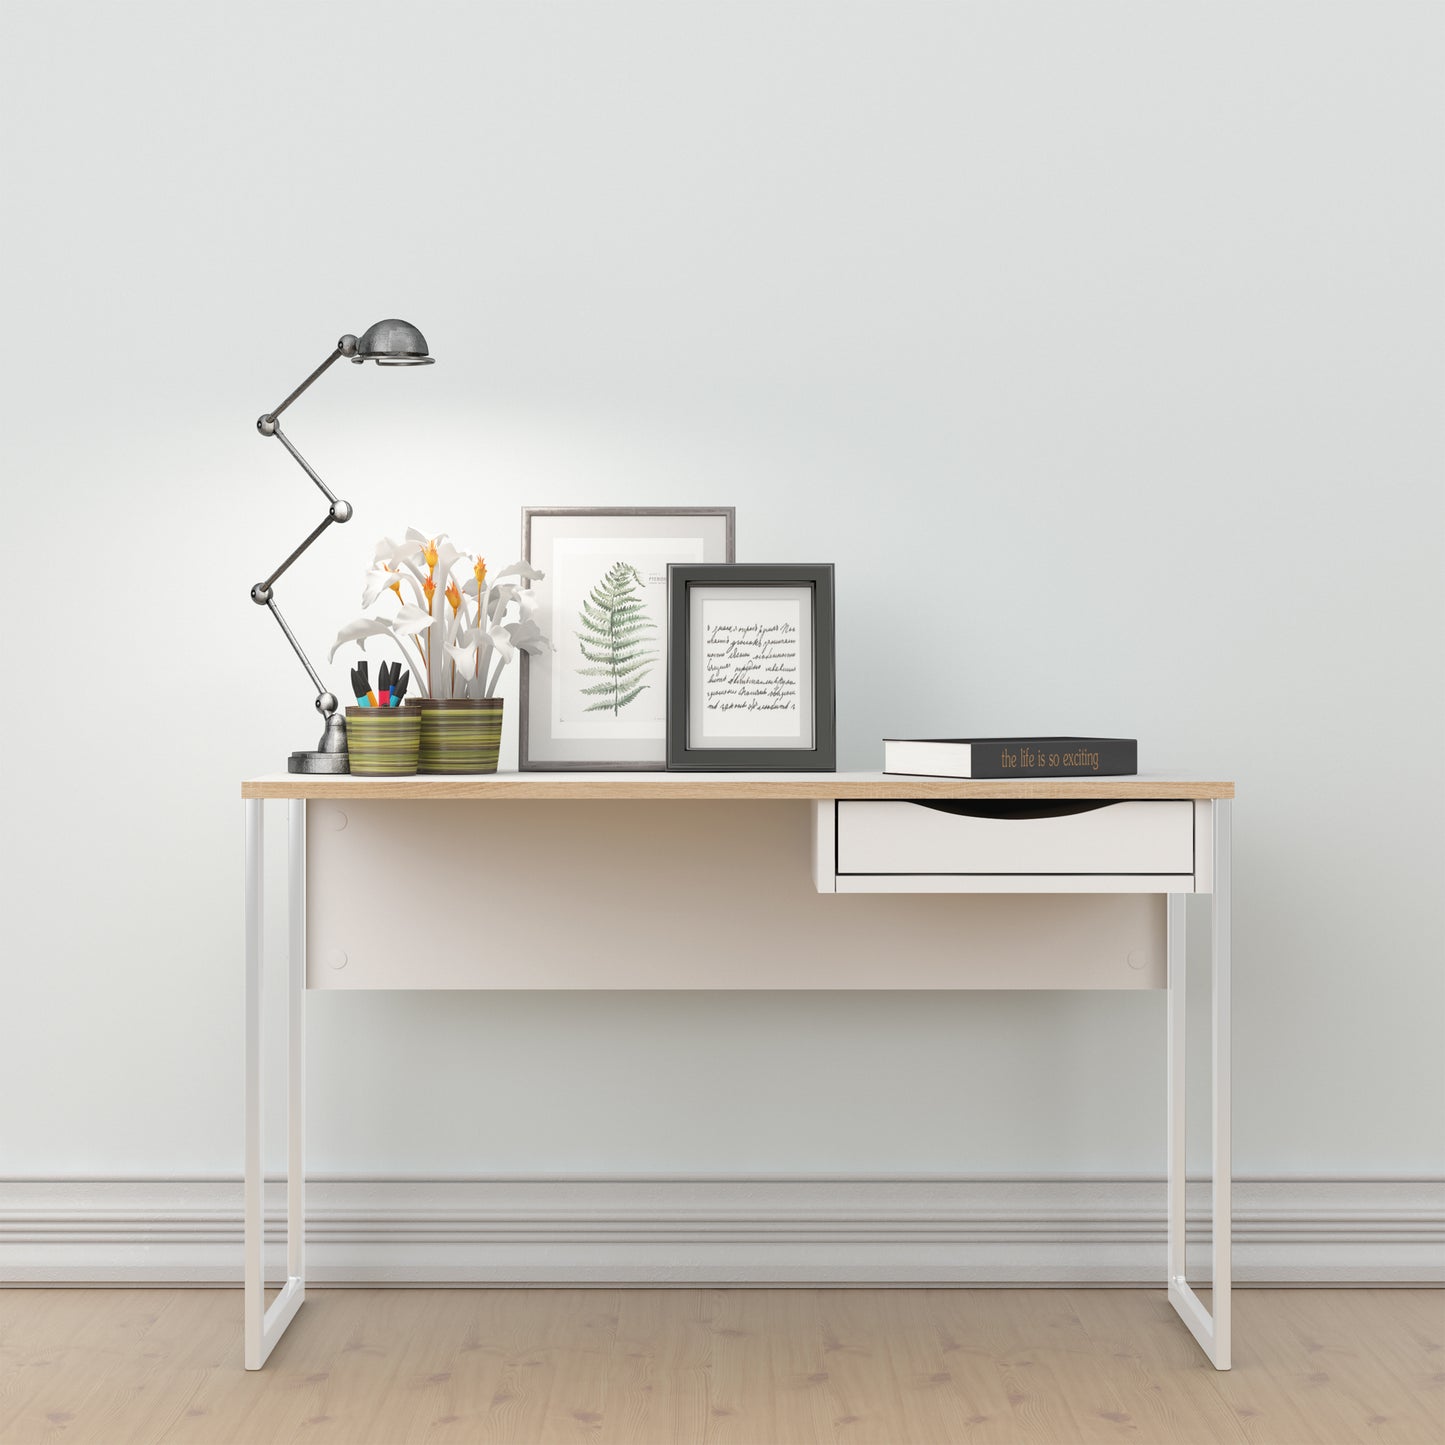 Function Plus  Desk 1 Drawer Wide in White with Oak Trim